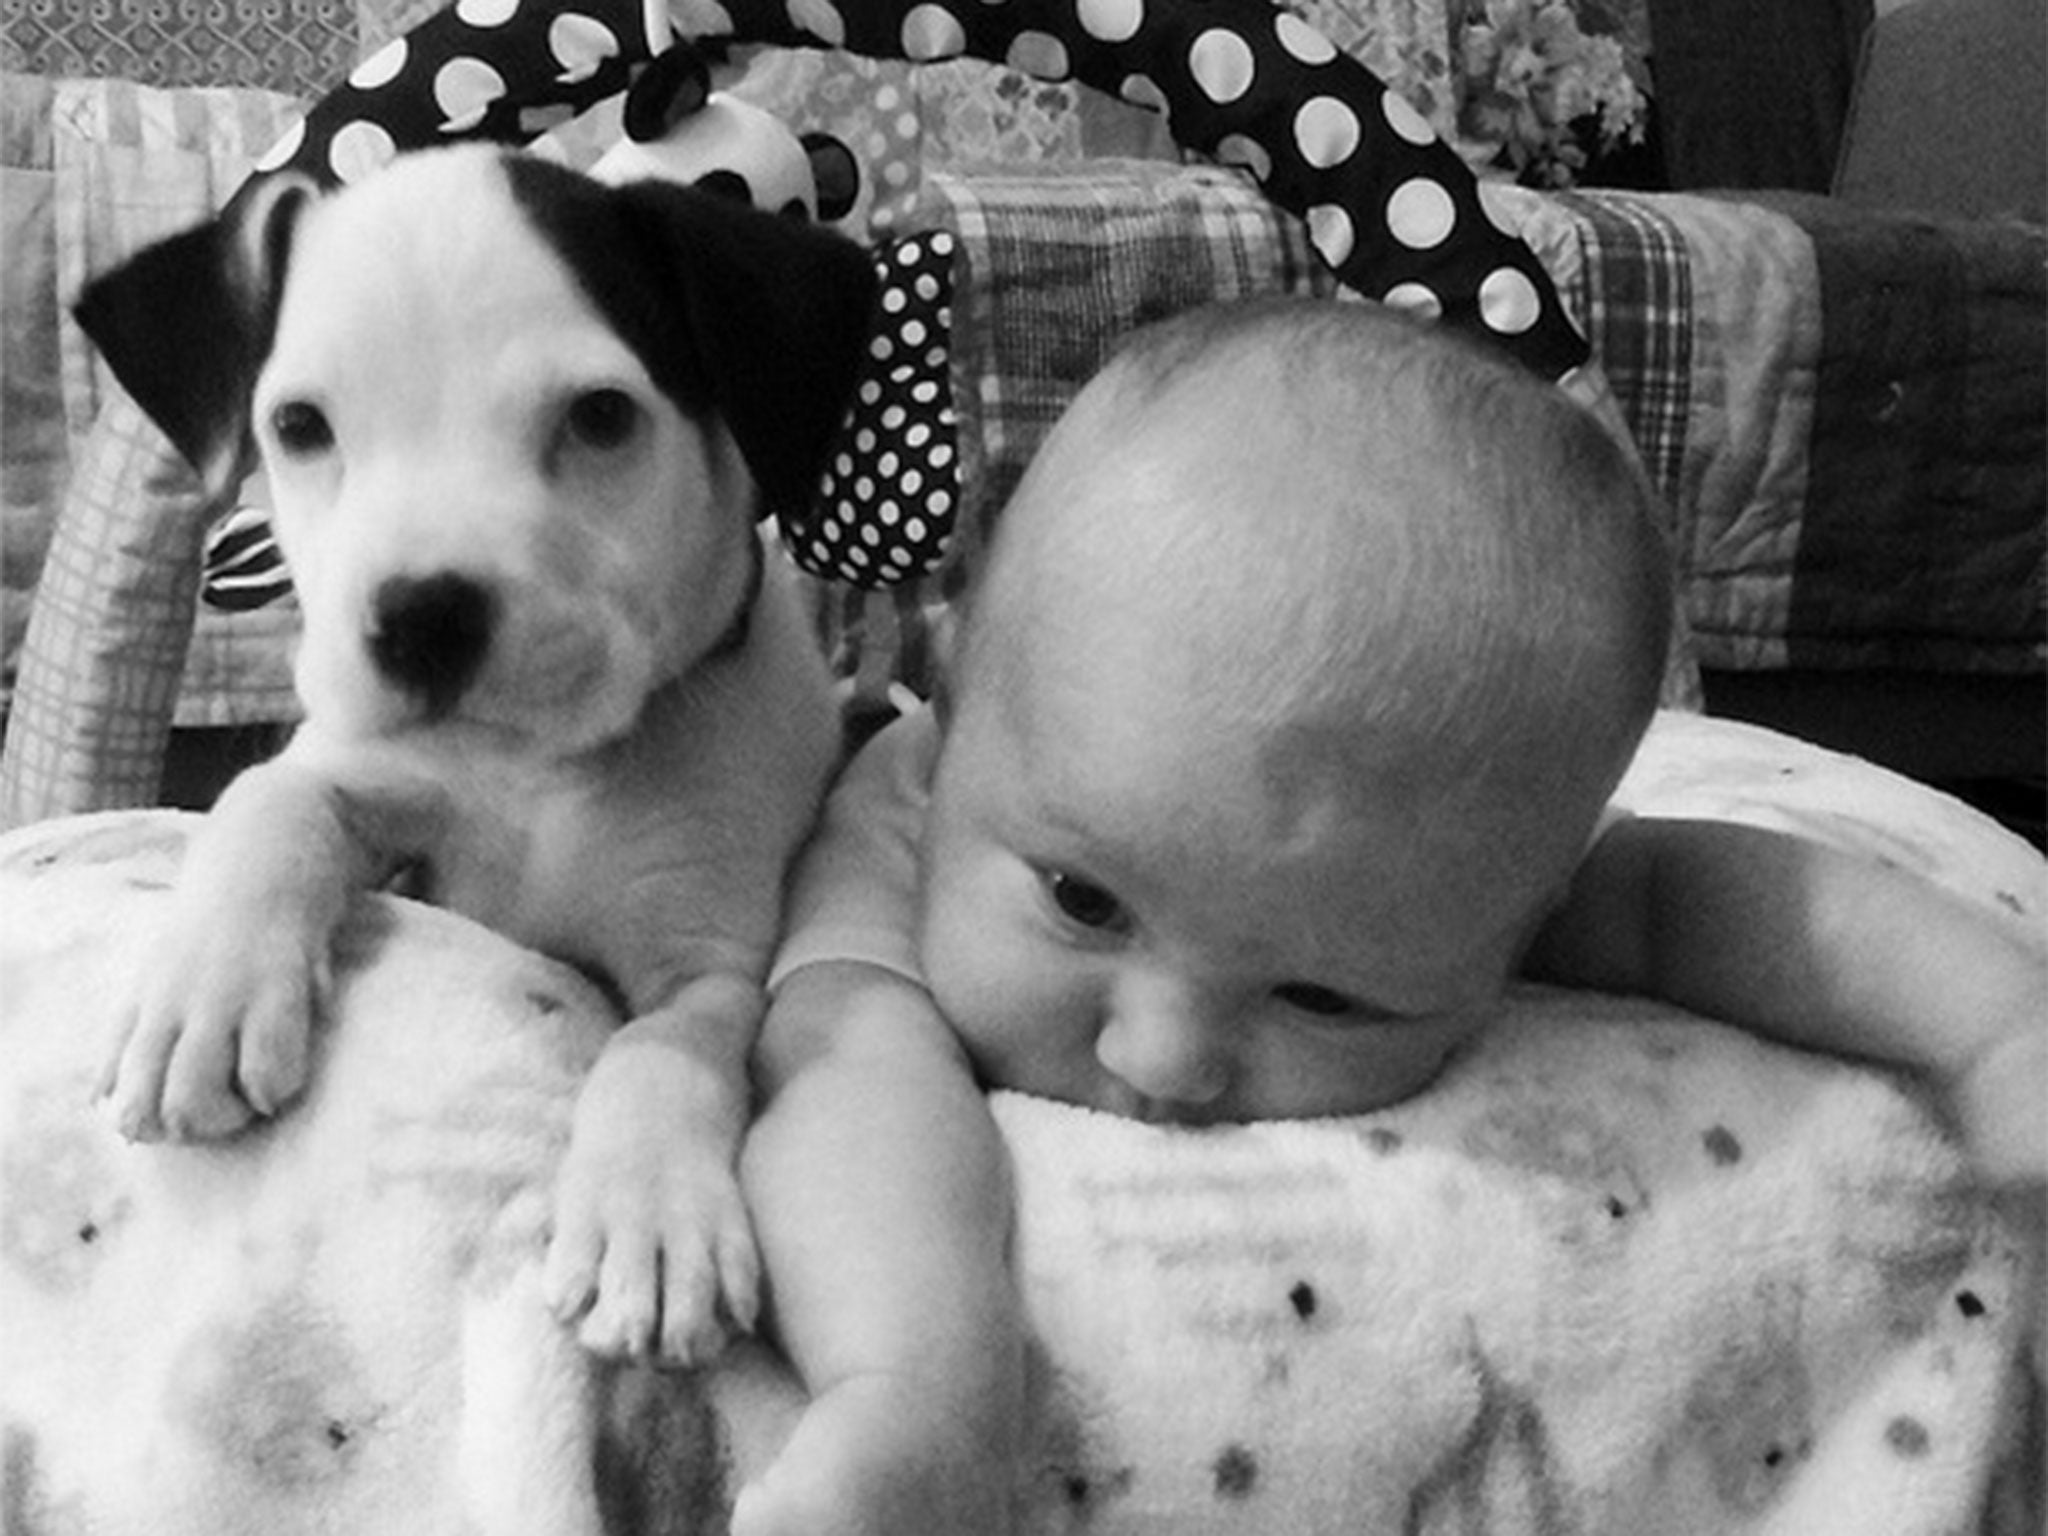 Baby Eisleigh and puppy Clyde hanging out together at home